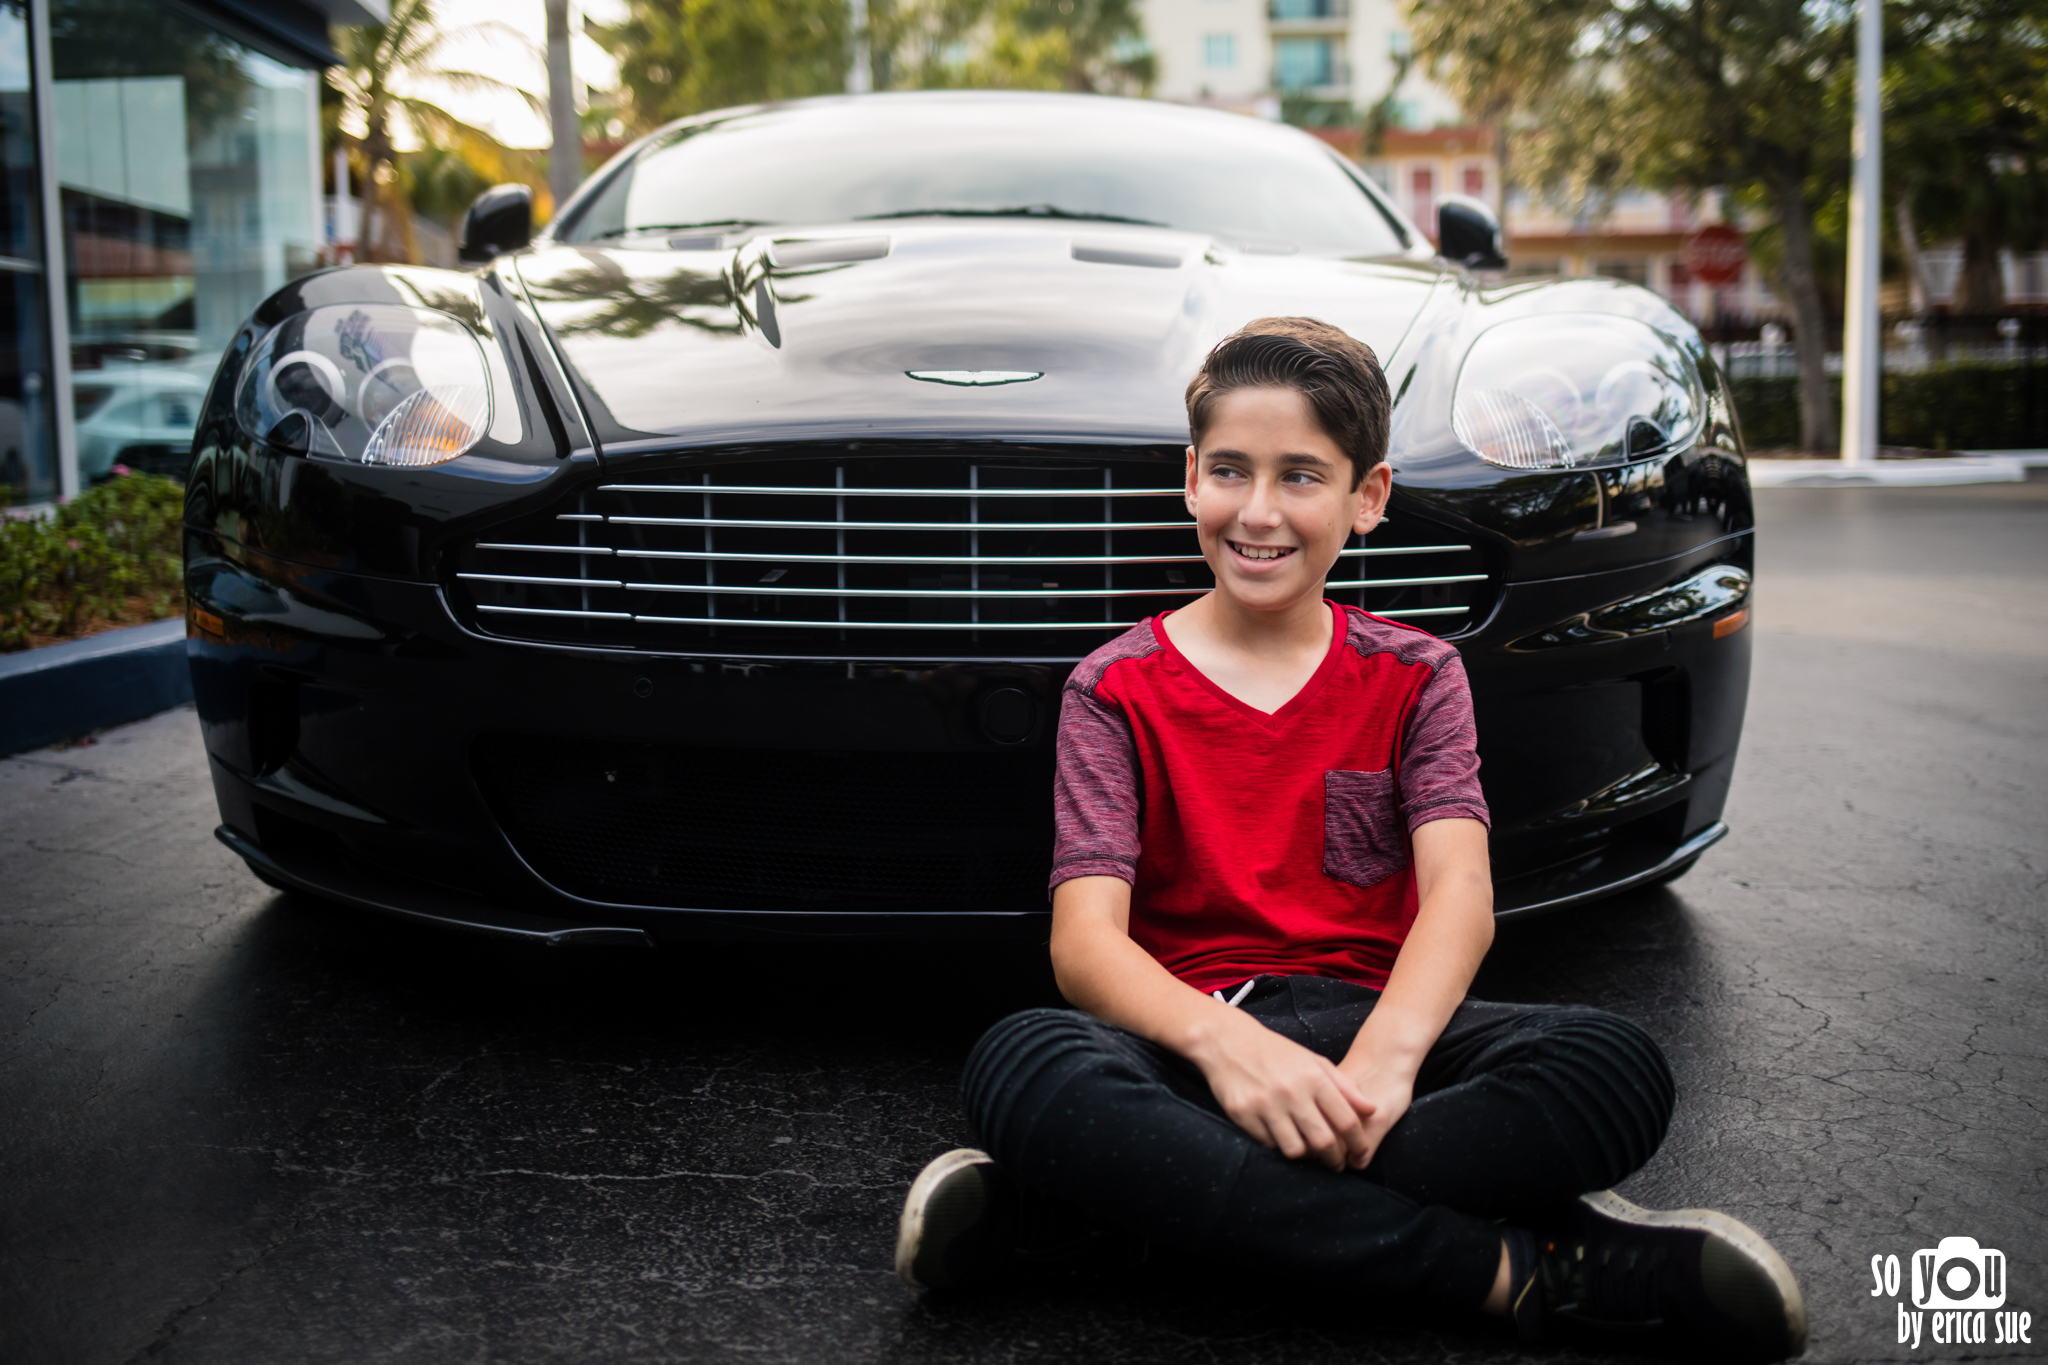 so-you-by-erica-sue-mitzvah-photographer-collection-luxury-car-ft-lauderdale-4942.jpg